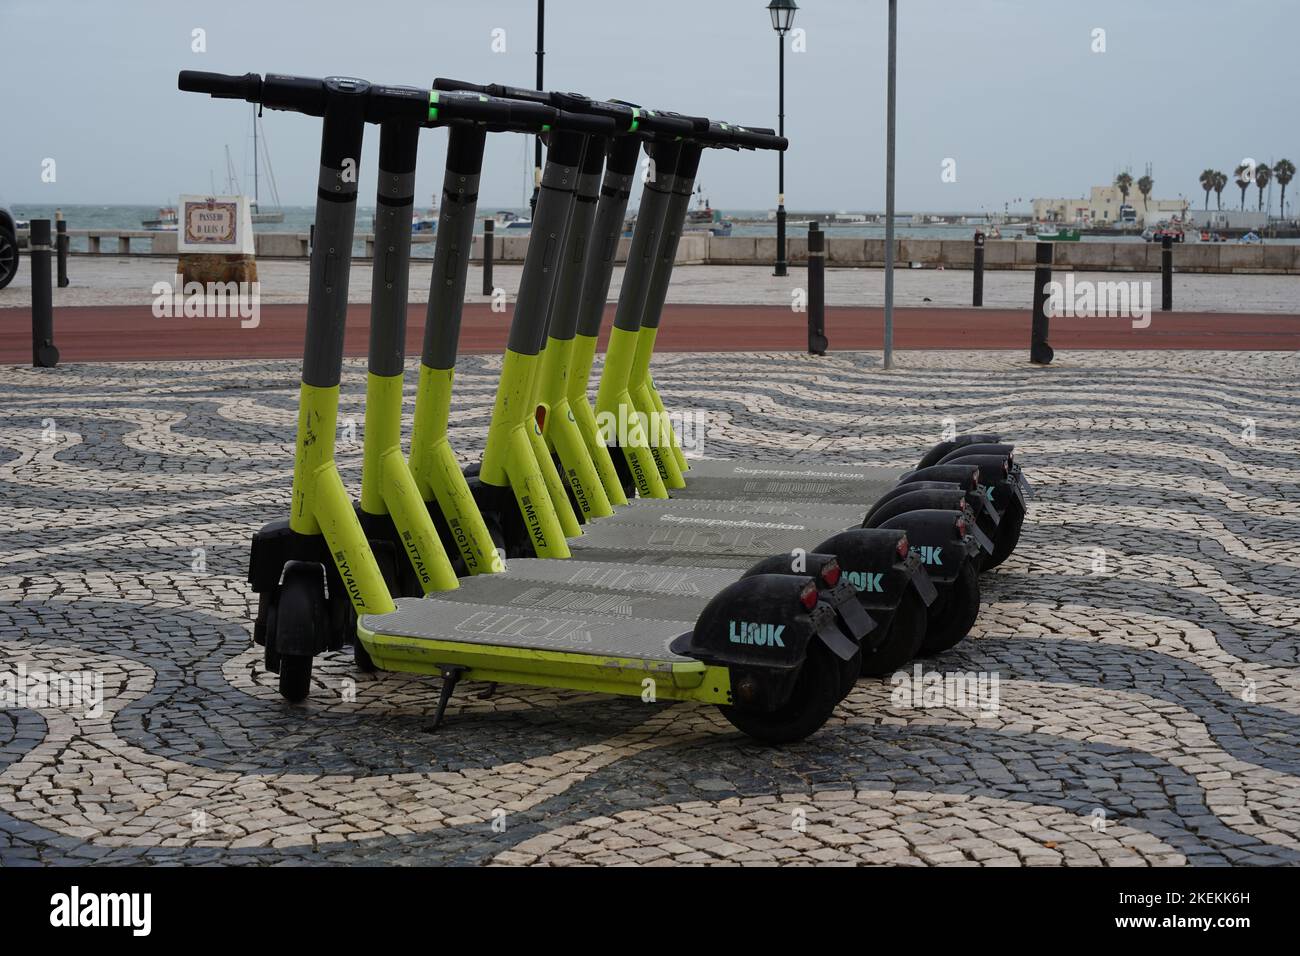 Cascais, Portugal - September 2022: A group of electric scooters (Link) parked at Cascais, near Passeio Don Luis I Stock Photo